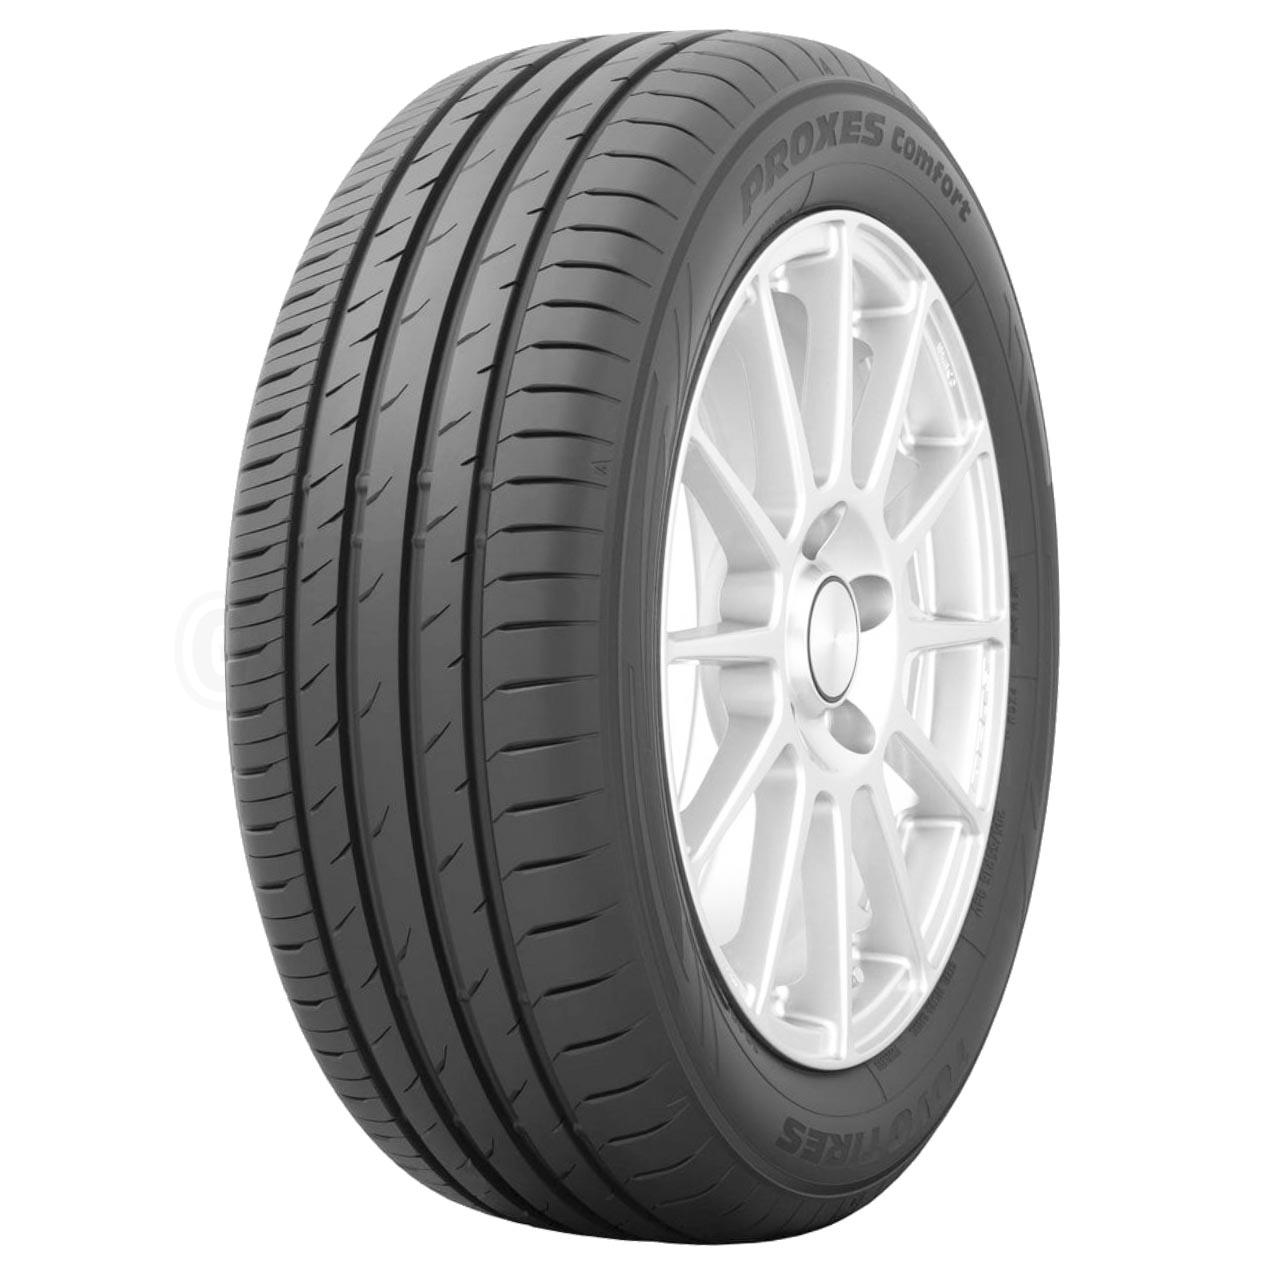 Toyo Proxes Comfort 225/60R18 104W XL